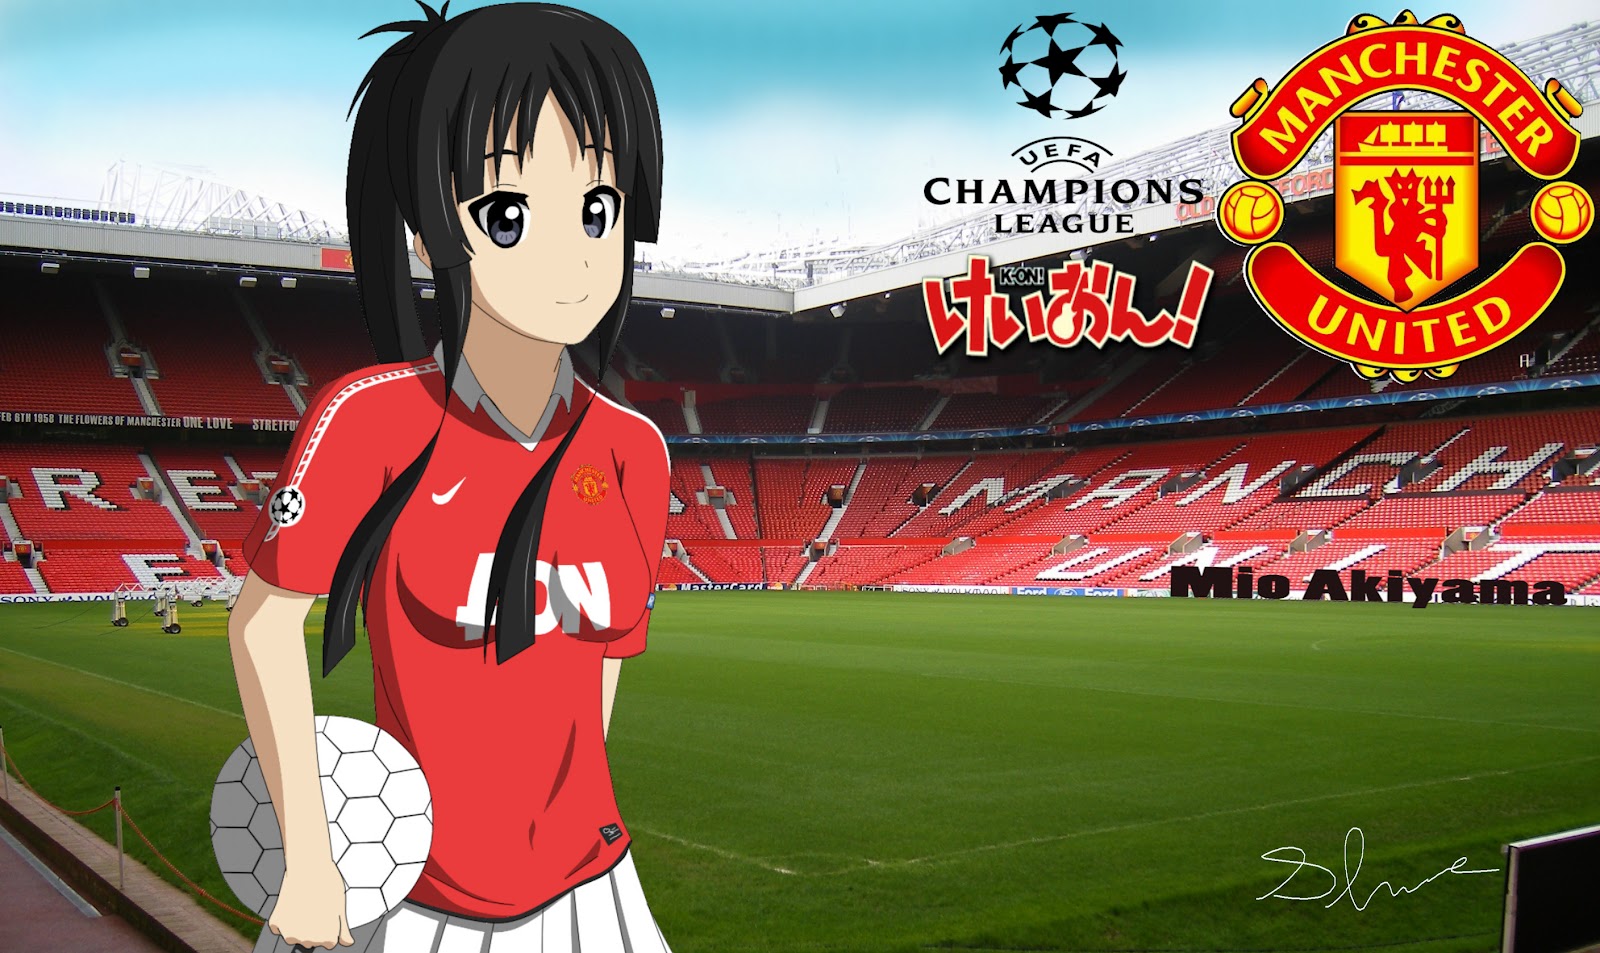 K-On's Mio-chan is a Manchester United Football (Soccer) Fan